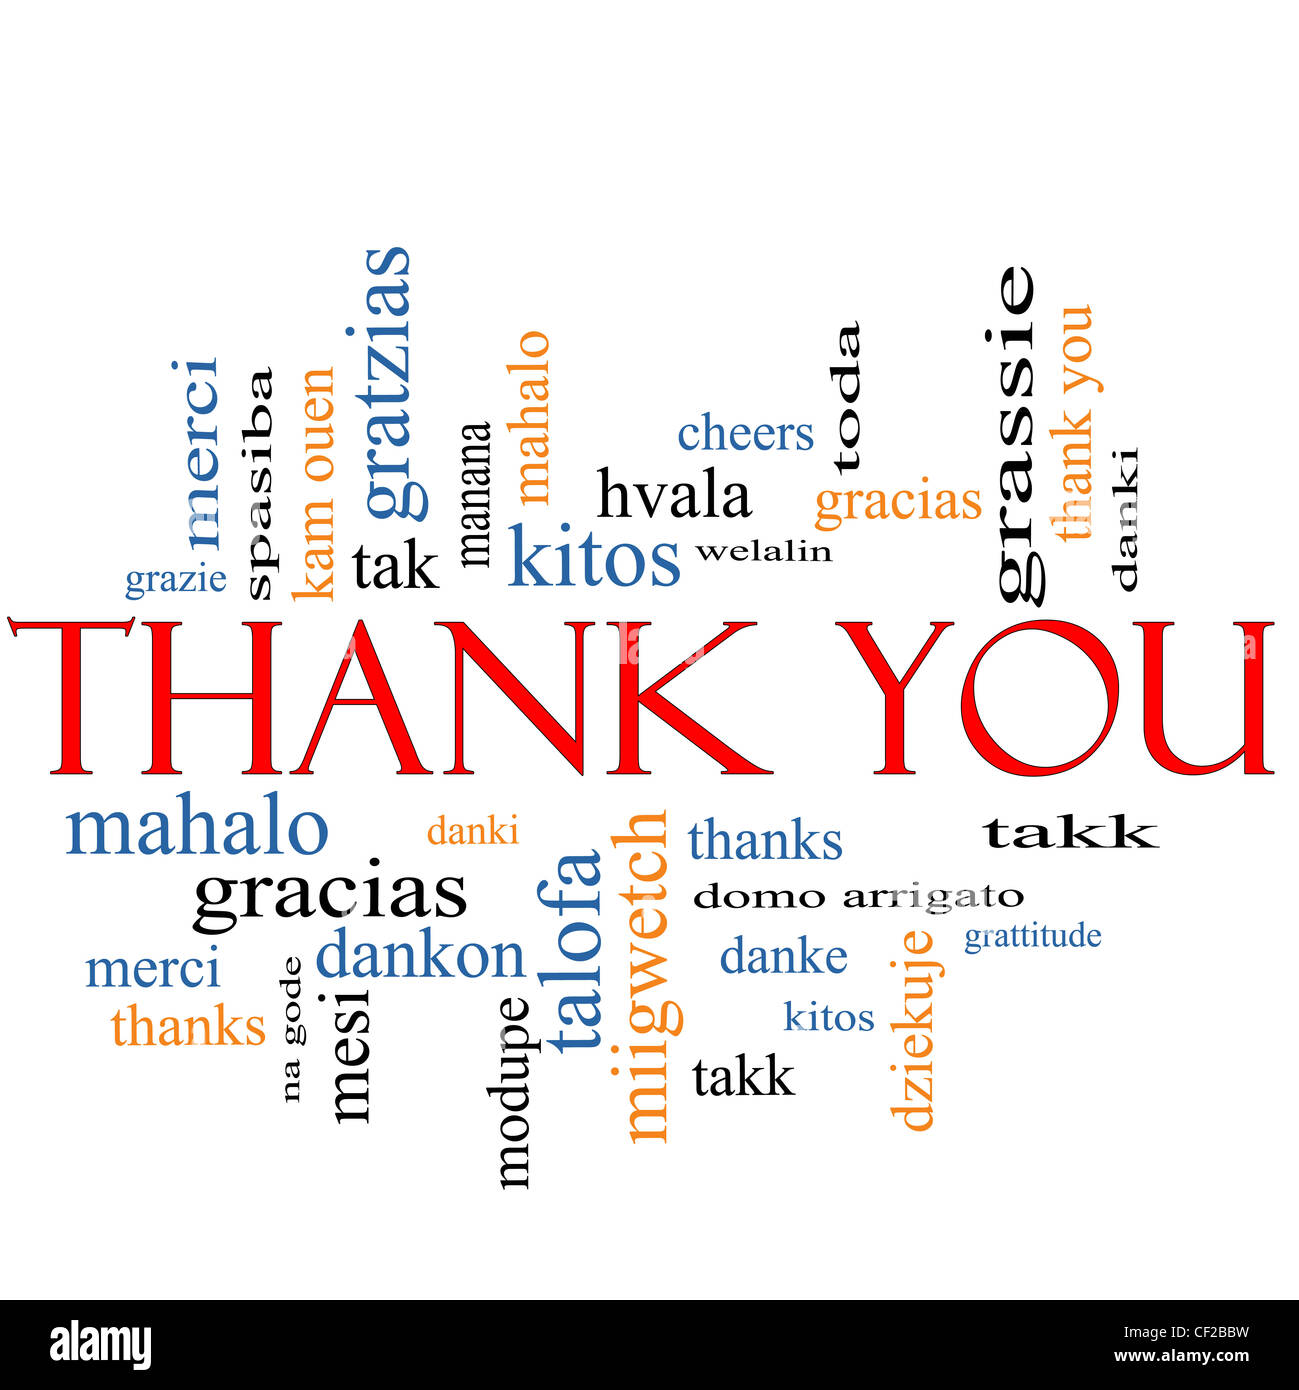 thank you clipart in different languages - photo #32